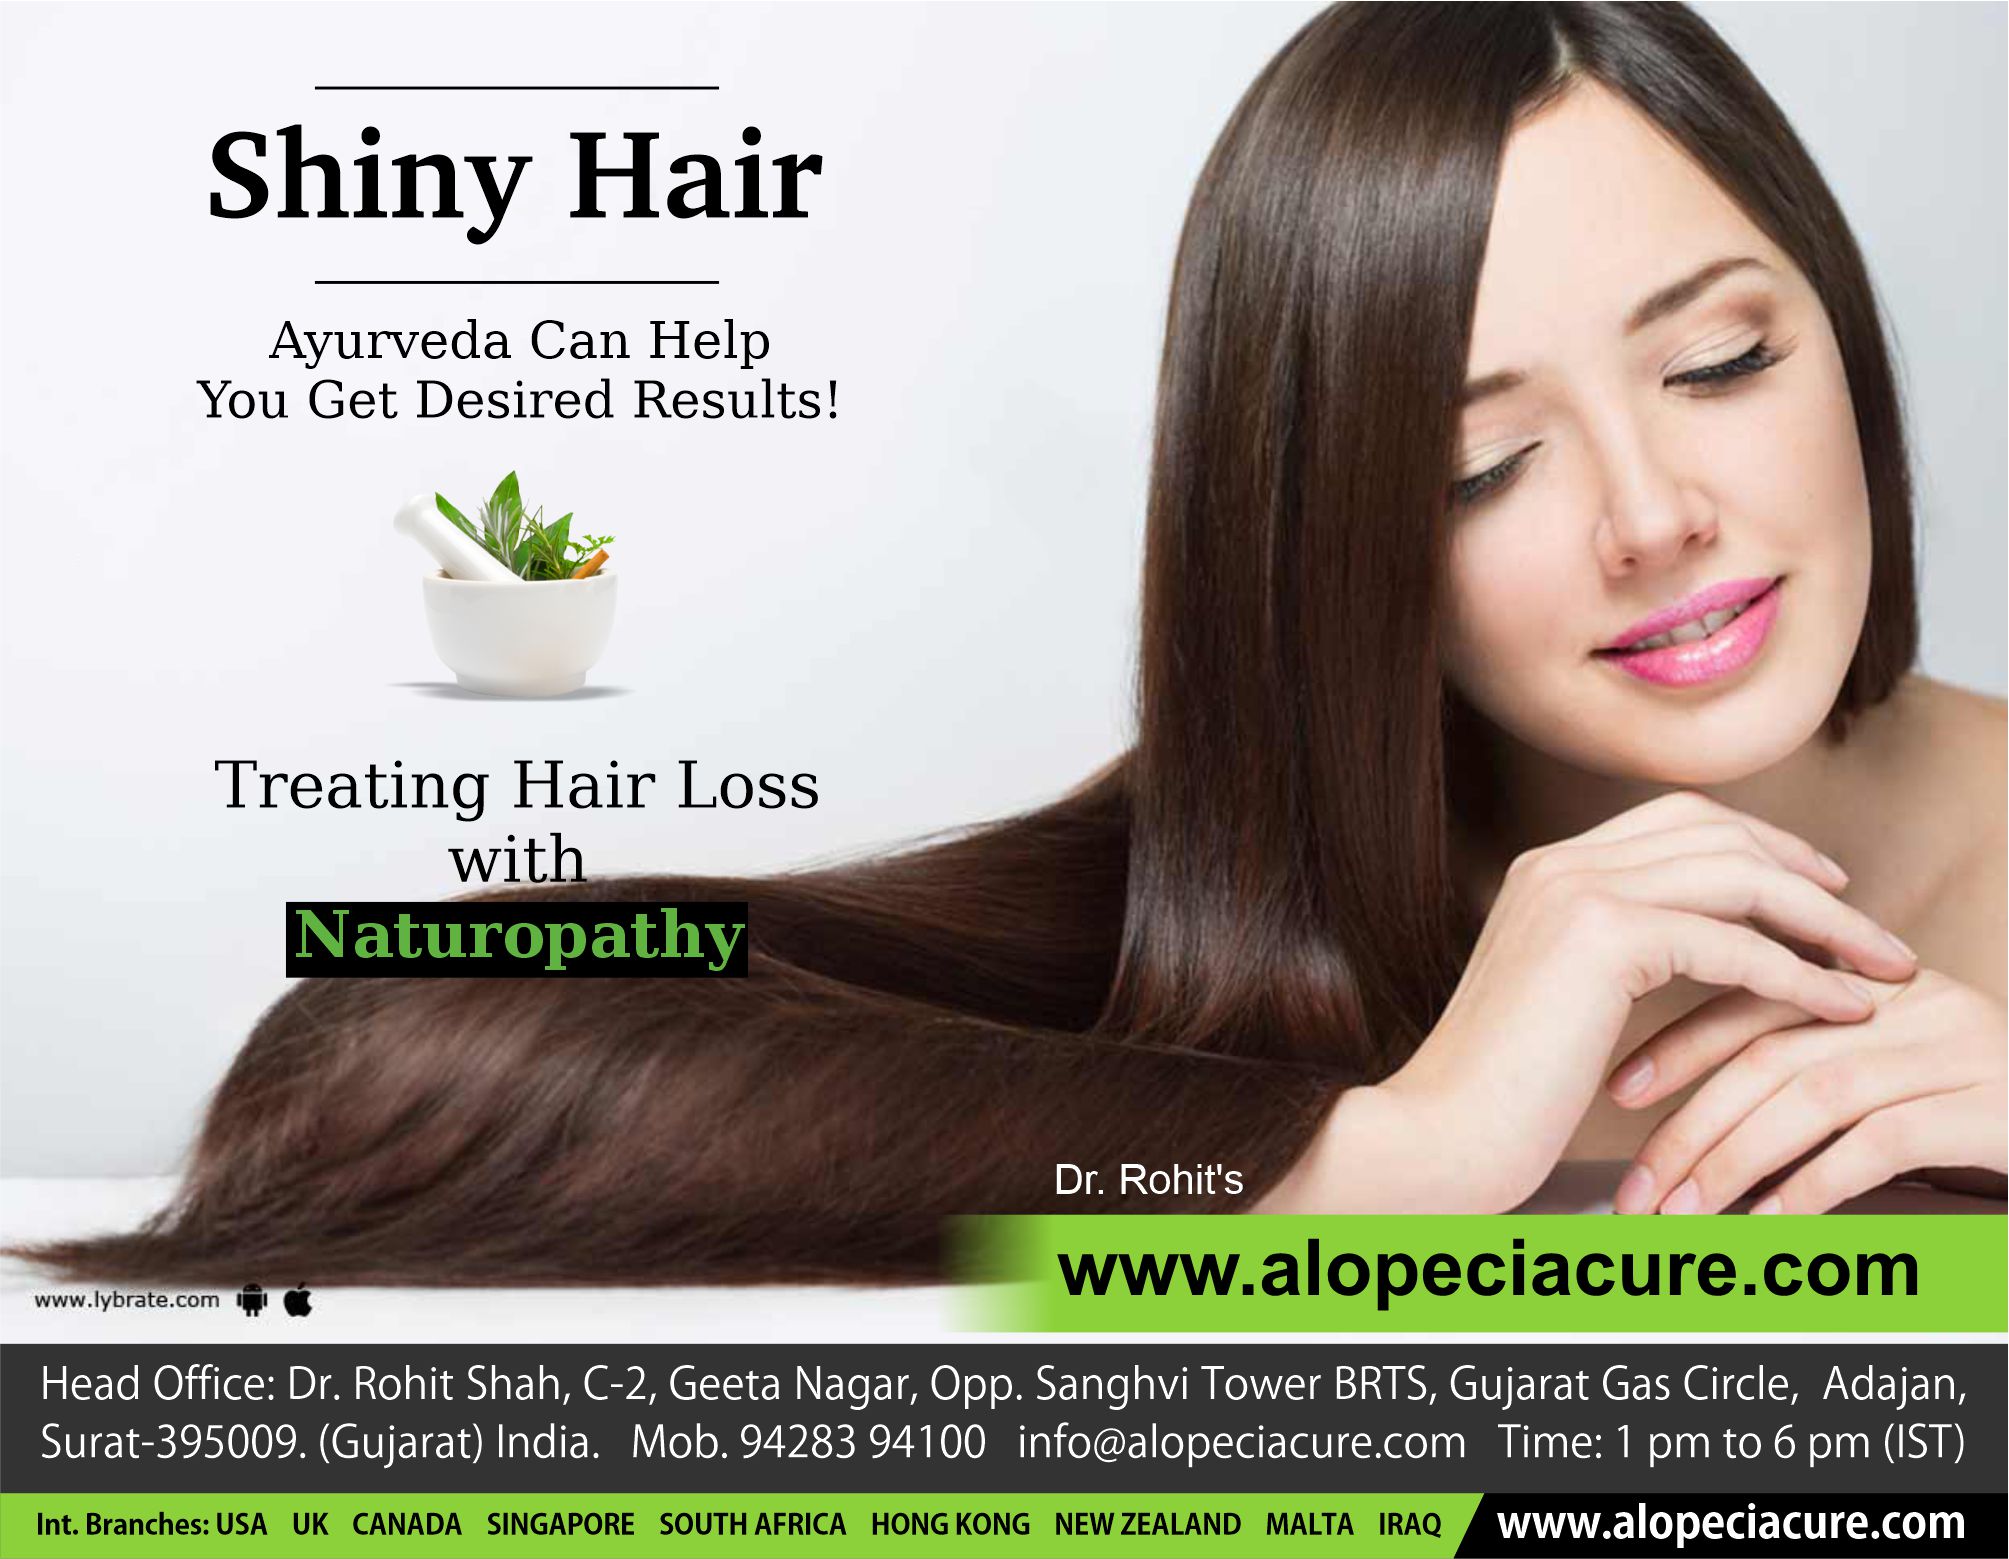 Shiny Hair - Ayurveda Can Help You Get Desired Results!